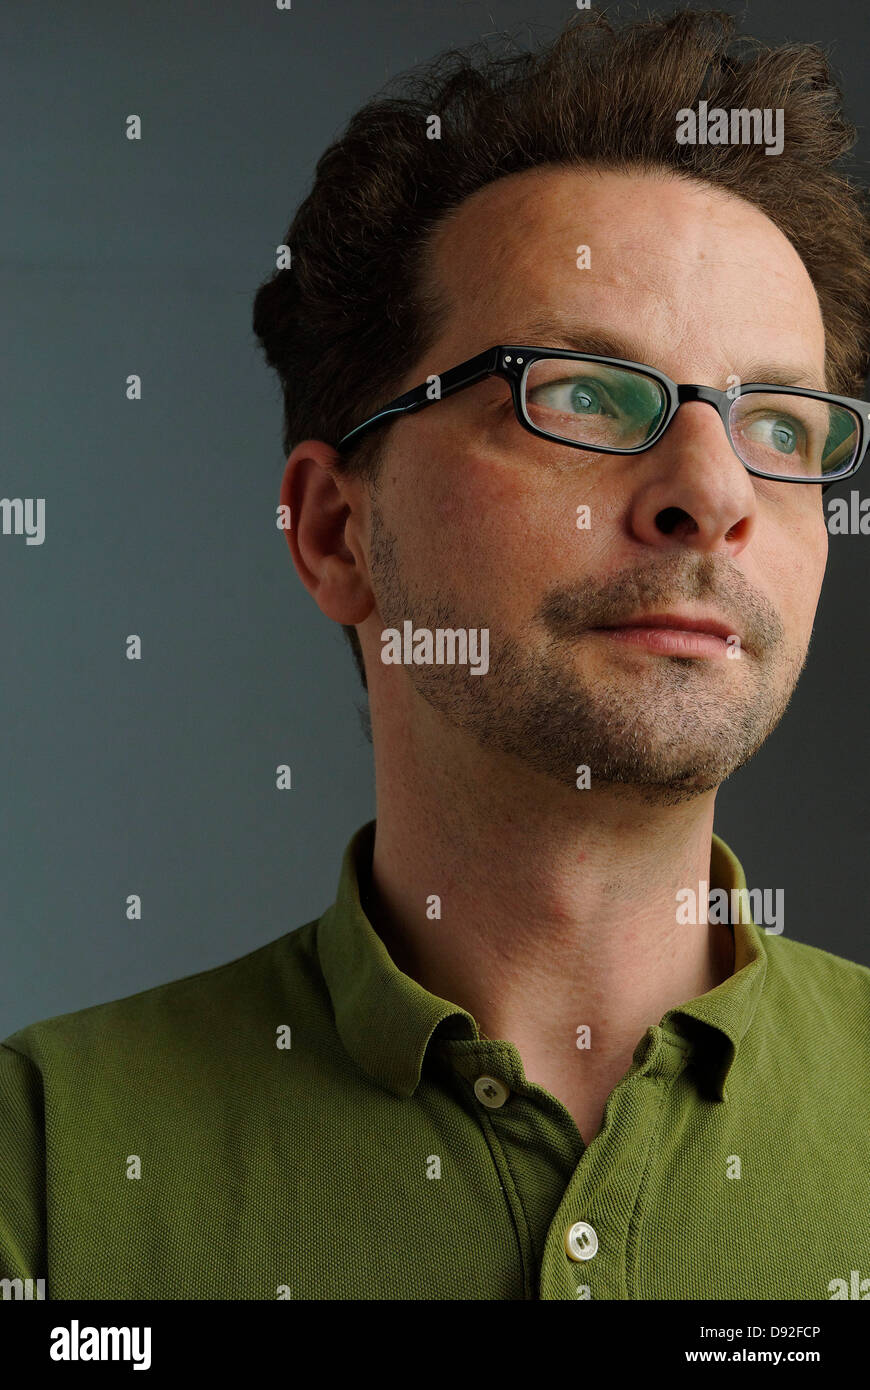 A forty years old man with glasses Stock Photo